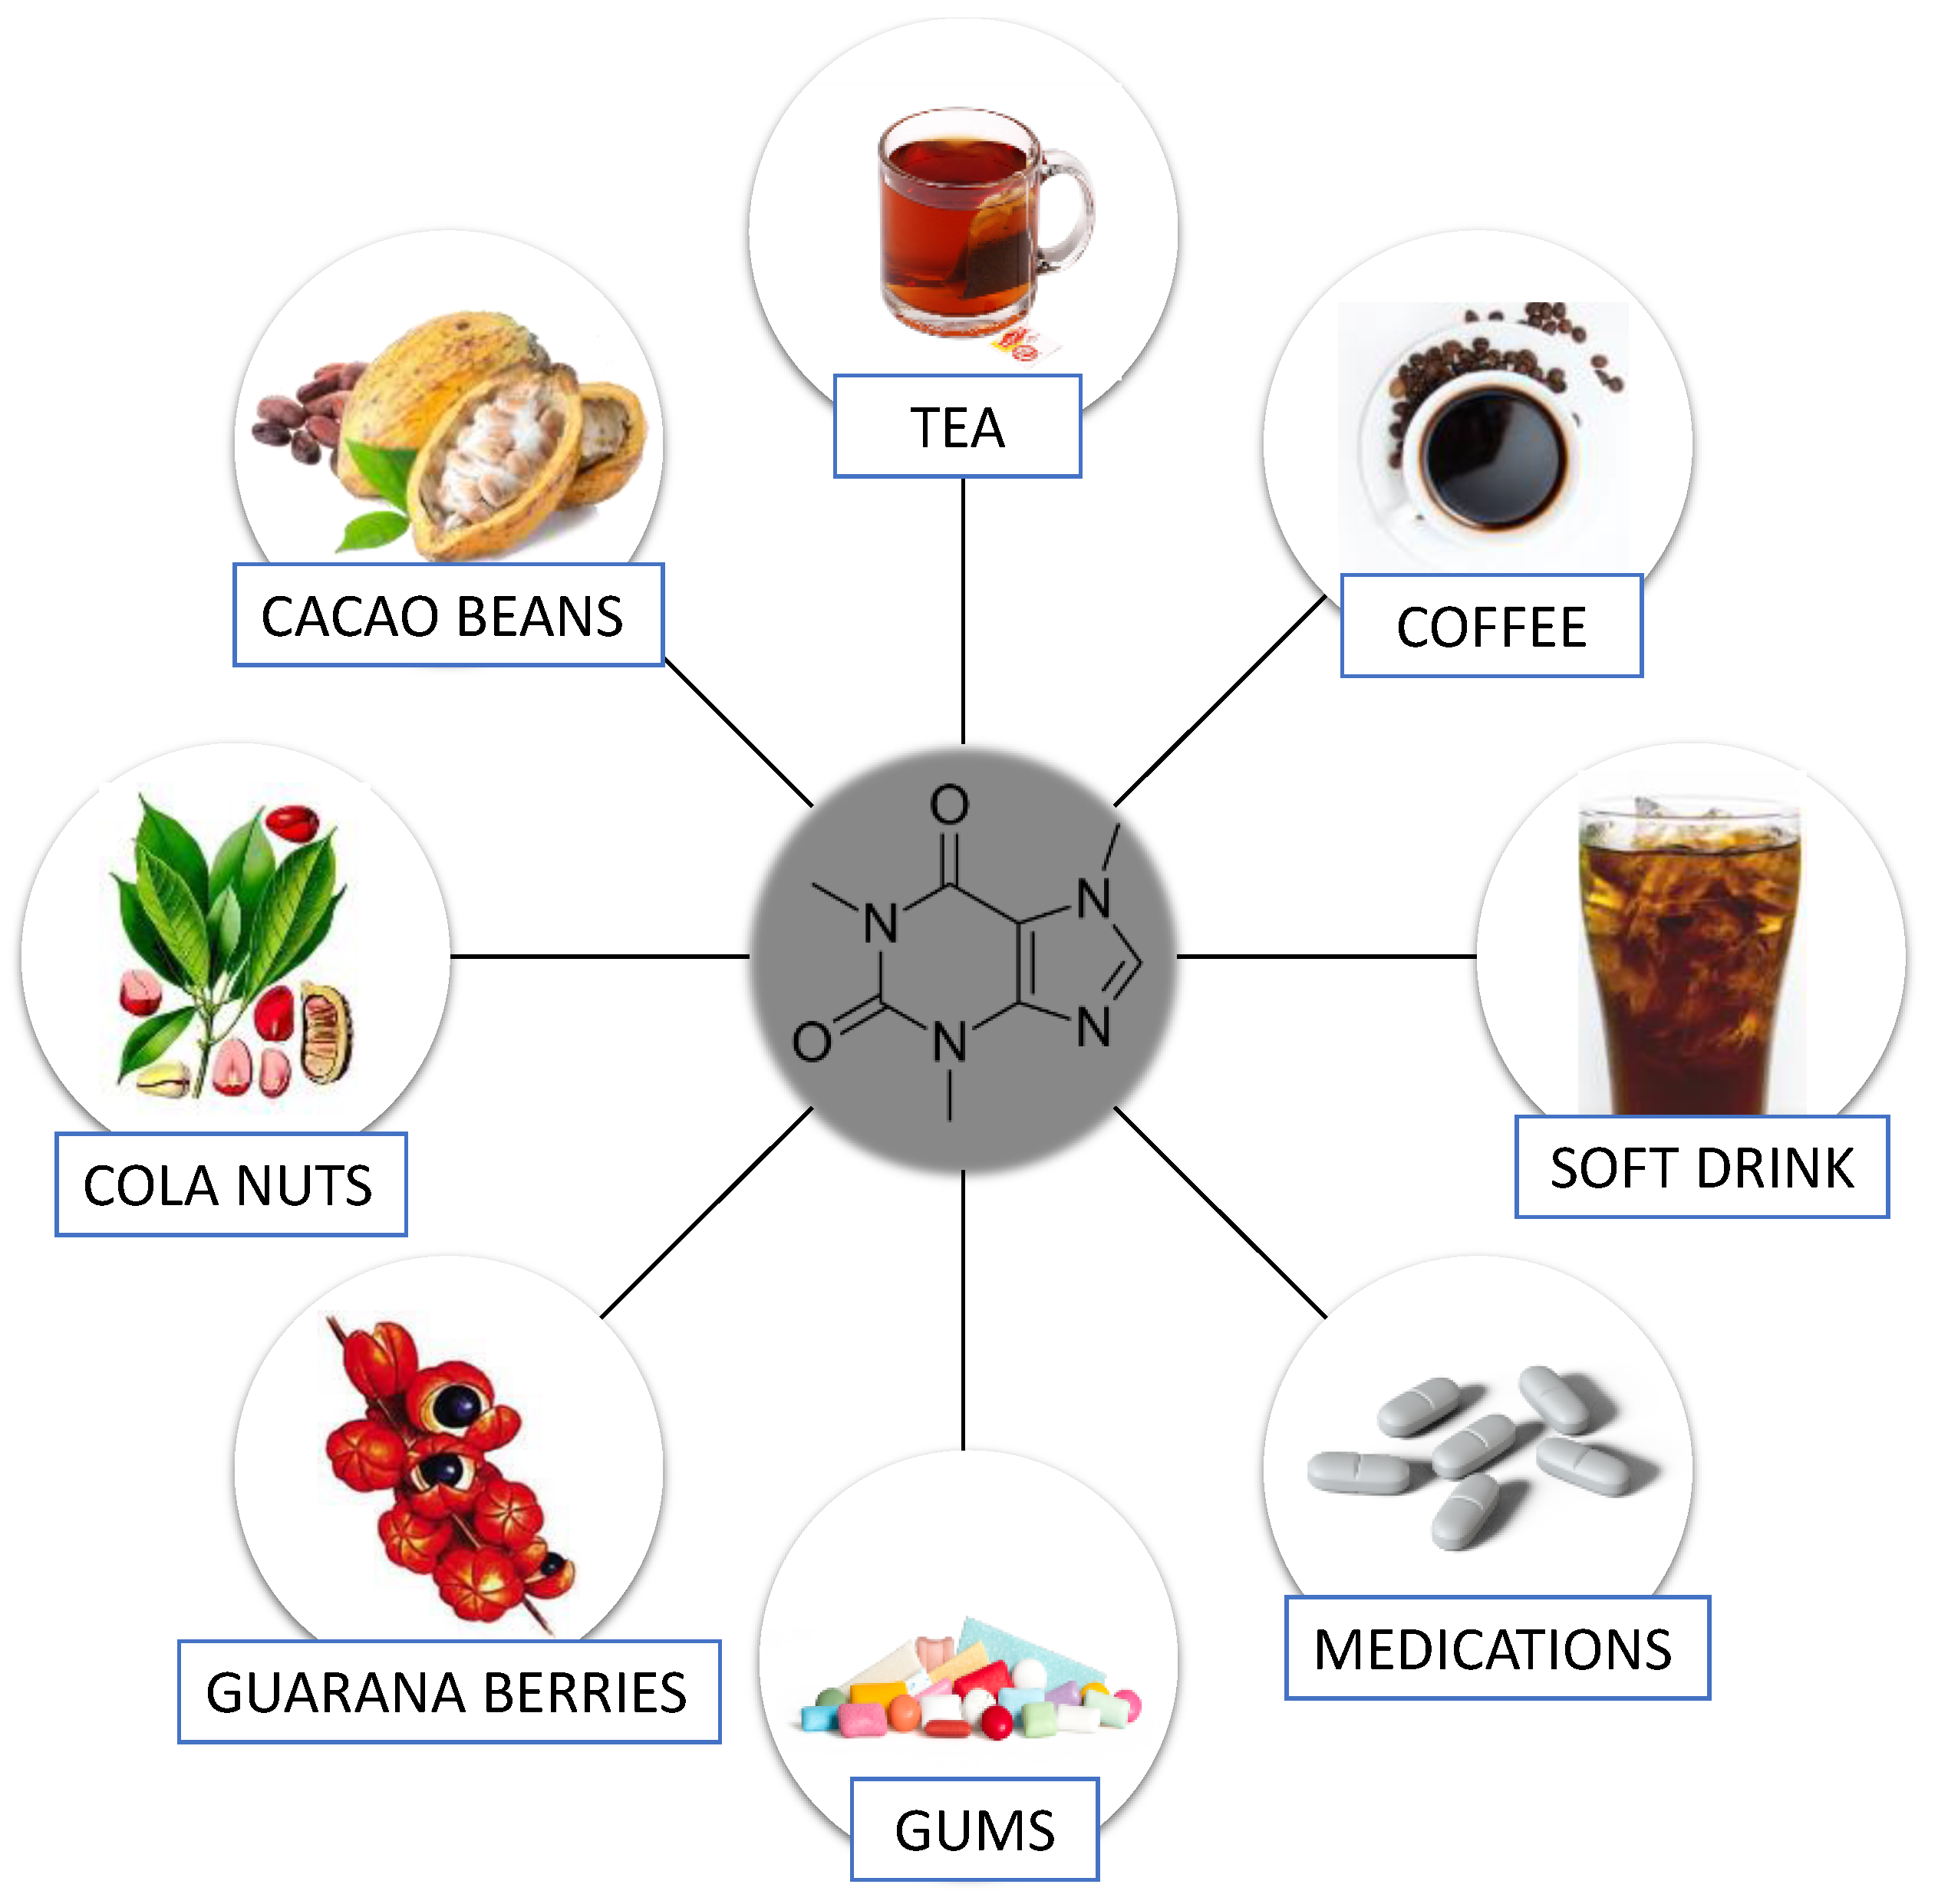 oscuro Gran cantidad Desviación Nutrients | Free Full-Text | Caffeine as a Factor Influencing the  Functioning of the Human Body—Friend or Foe?